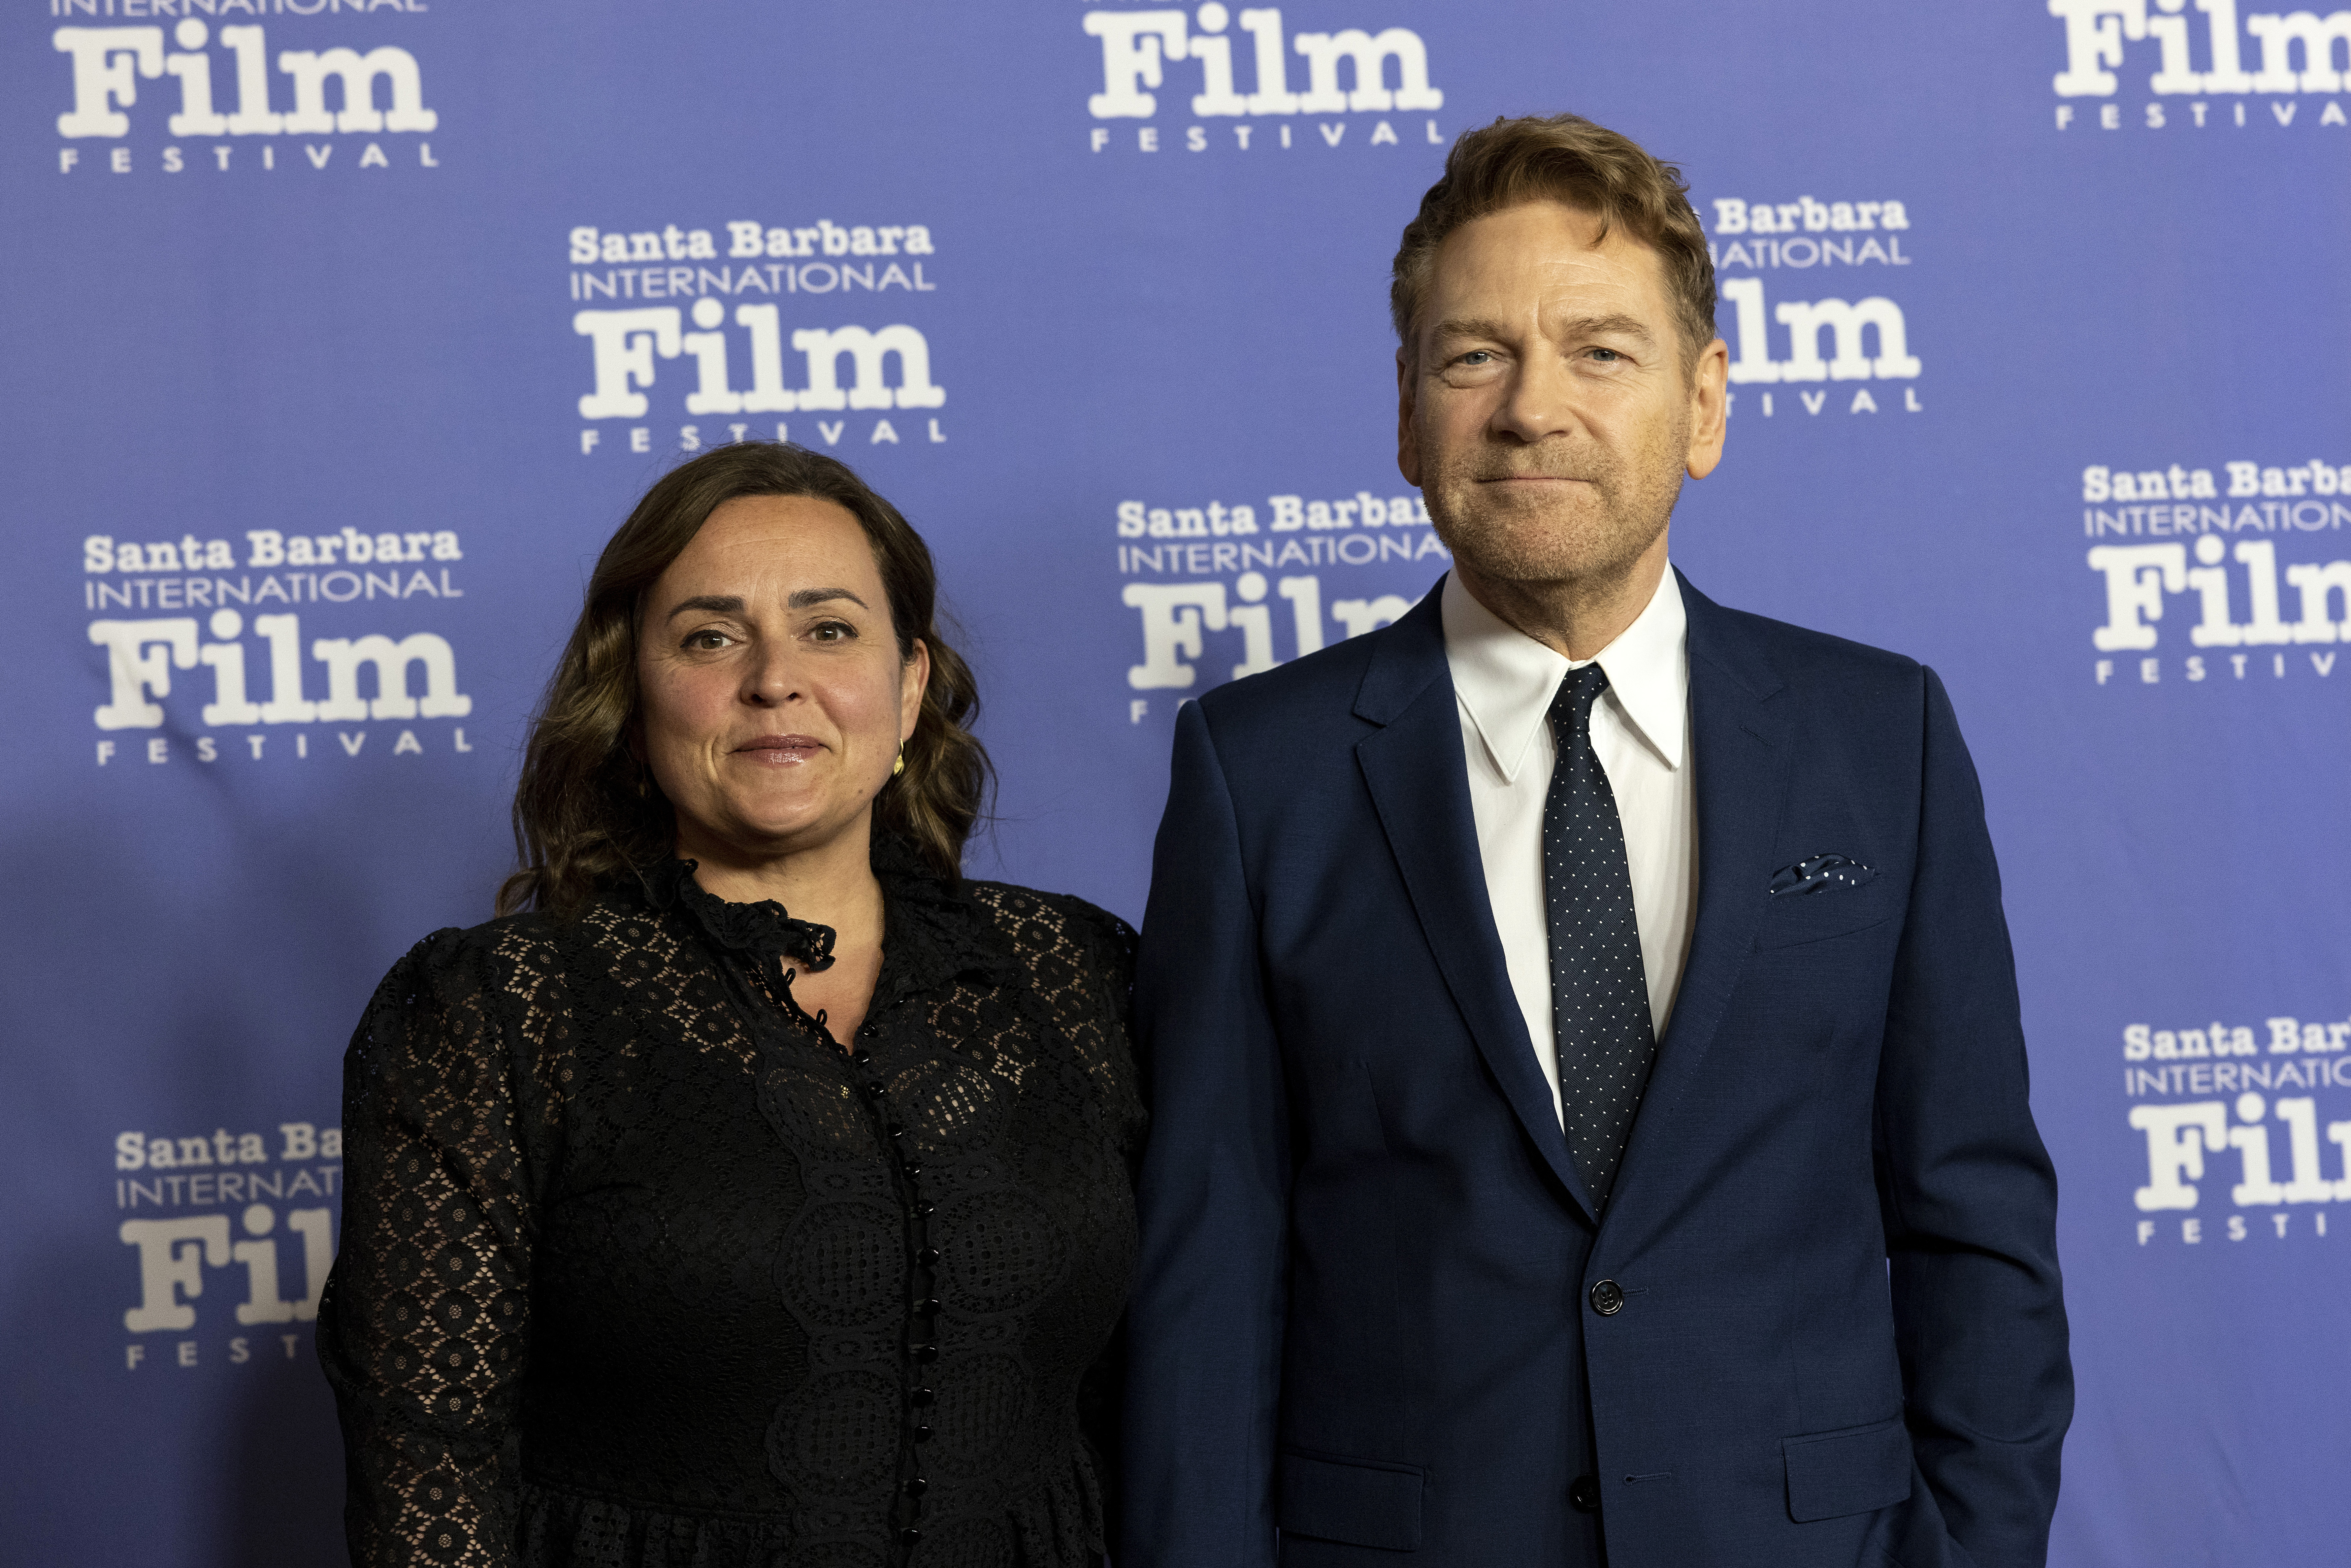 Lindsay Brunnock and Kenneth Branagh on March 3, 2022, in Santa Barbara, California | Source: Getty Images